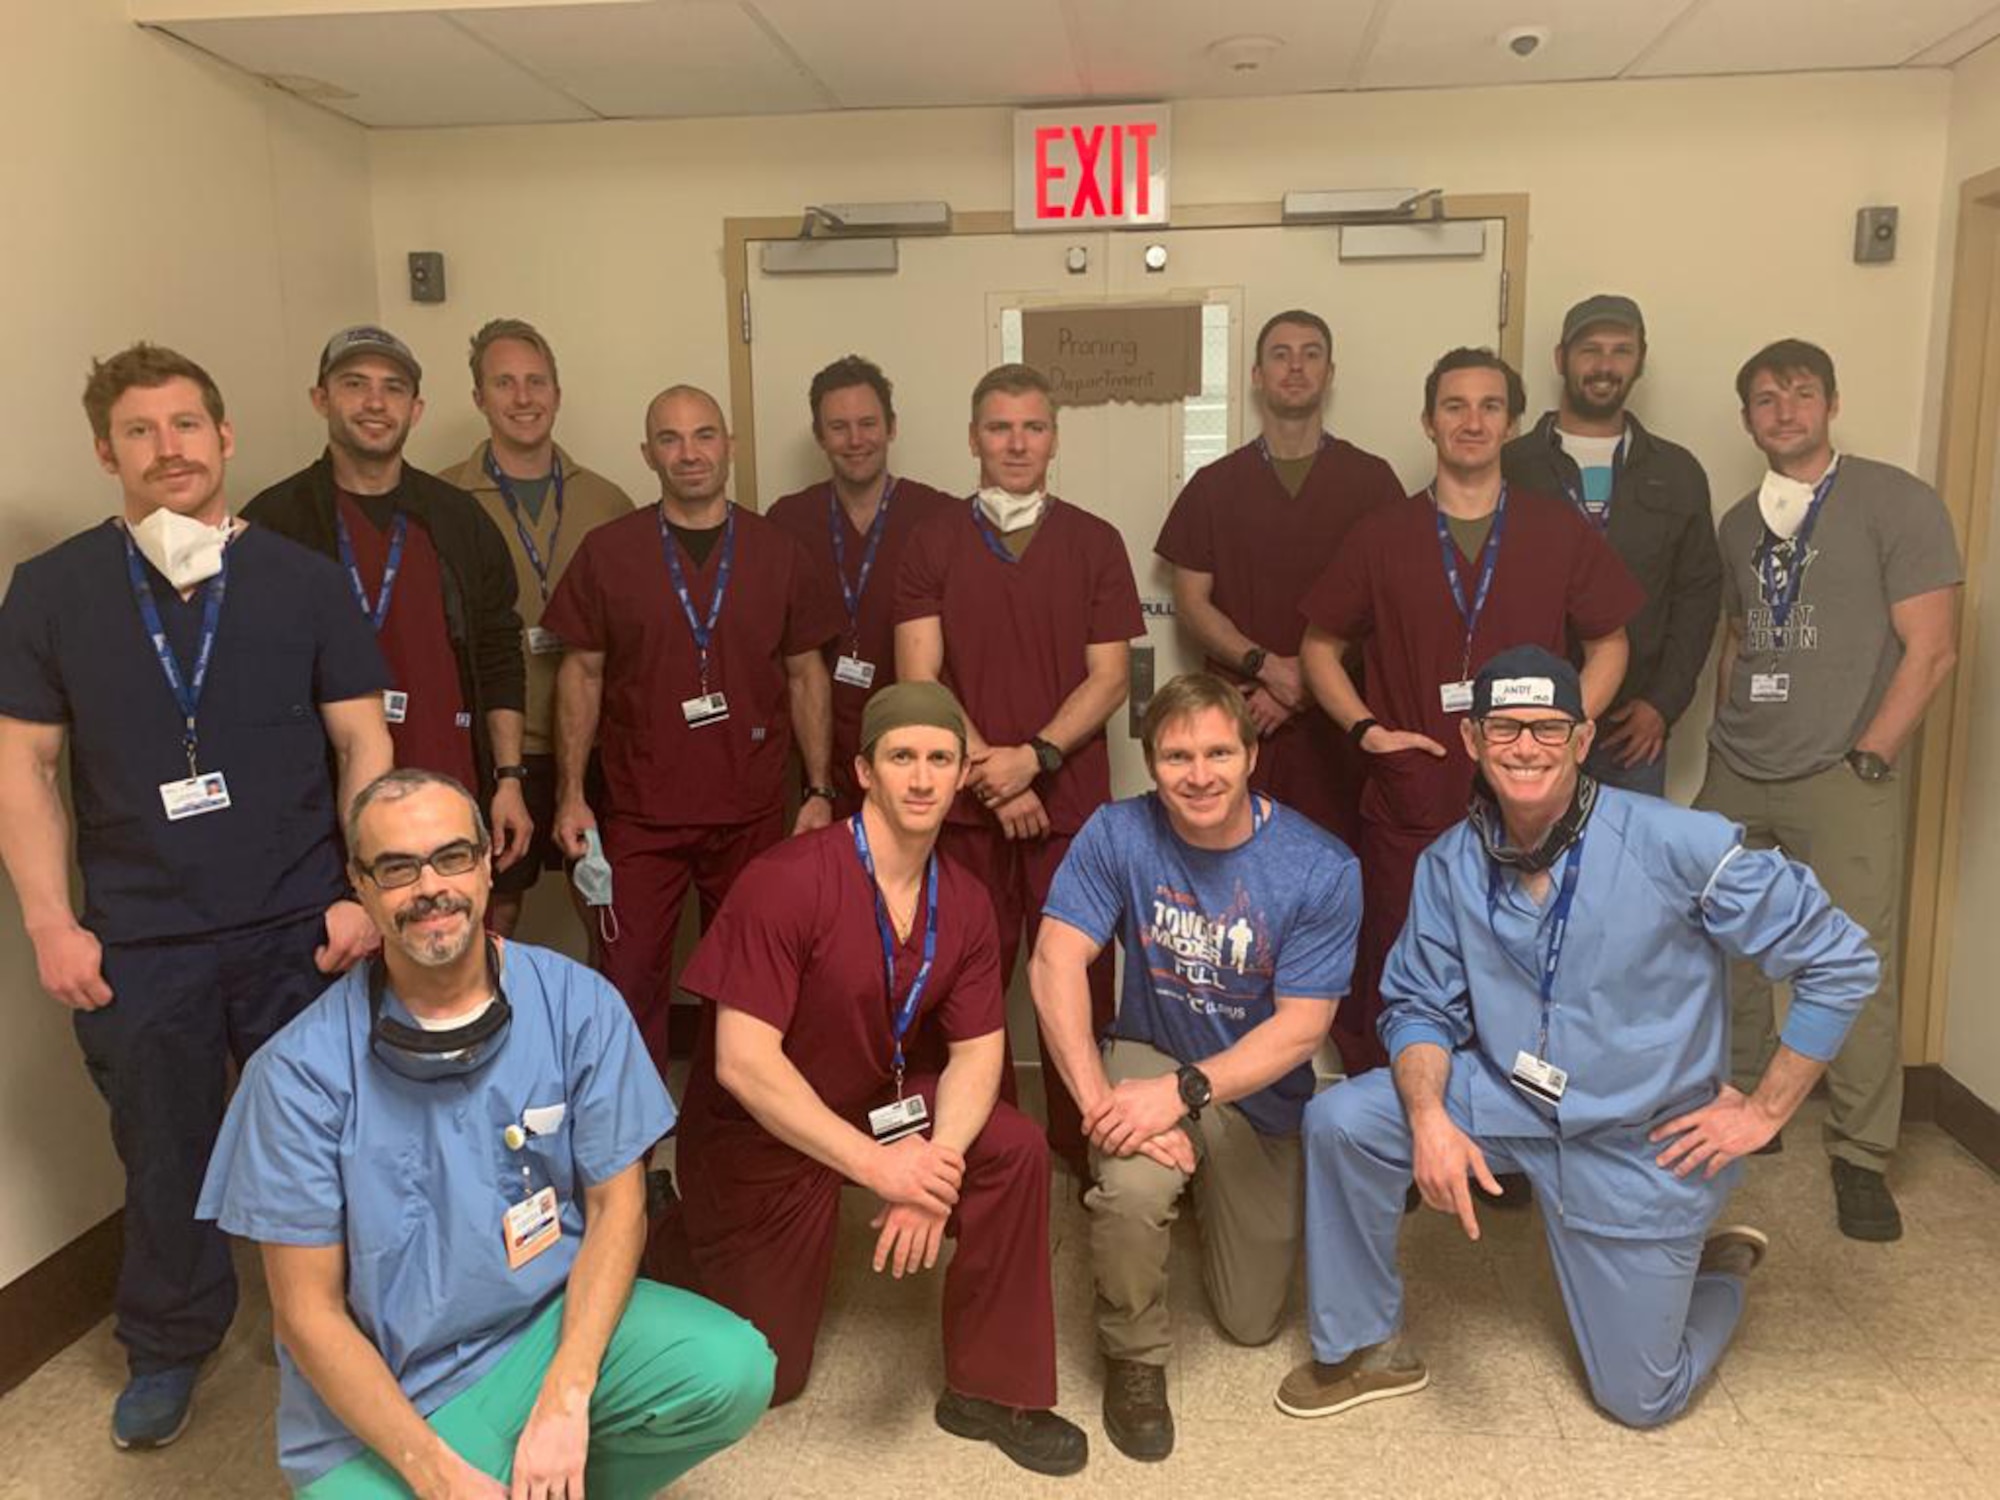 Pararescue Airmen assigned to the 103rd Rescue Squadron of the New York Air National Guard's 106th Rescue Wing who assisted medical staff at Elmhurst Hospital in Queens, N.Y., during the COVID-19 pandemic, with members of the hospital staff.